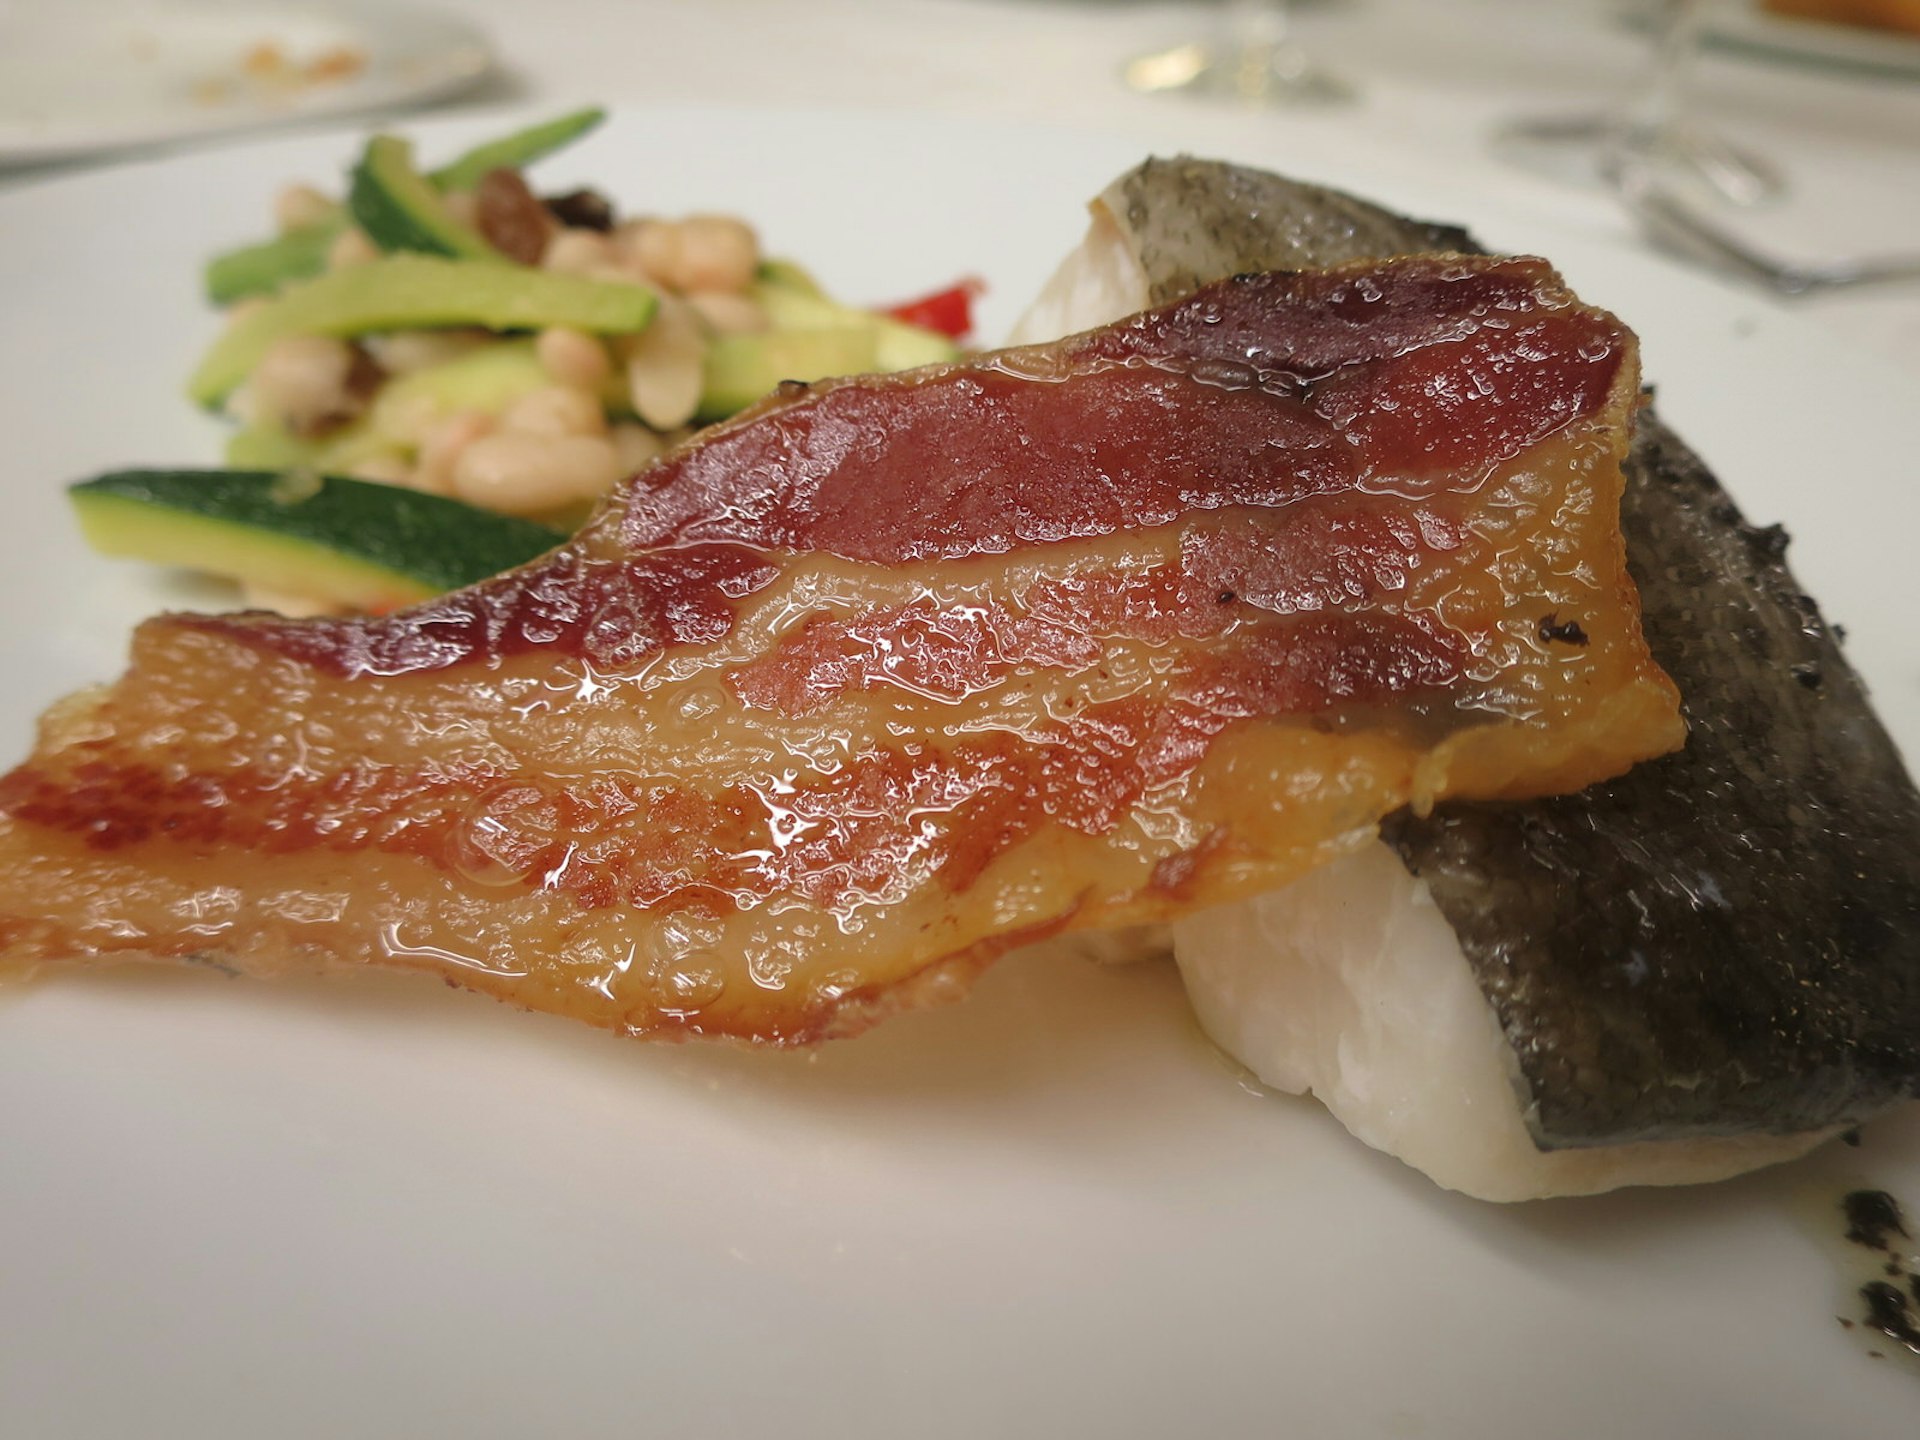 Cod with bacon and warm bean salad at La Deu, Olot © Karyn Noble / Lonely Planet